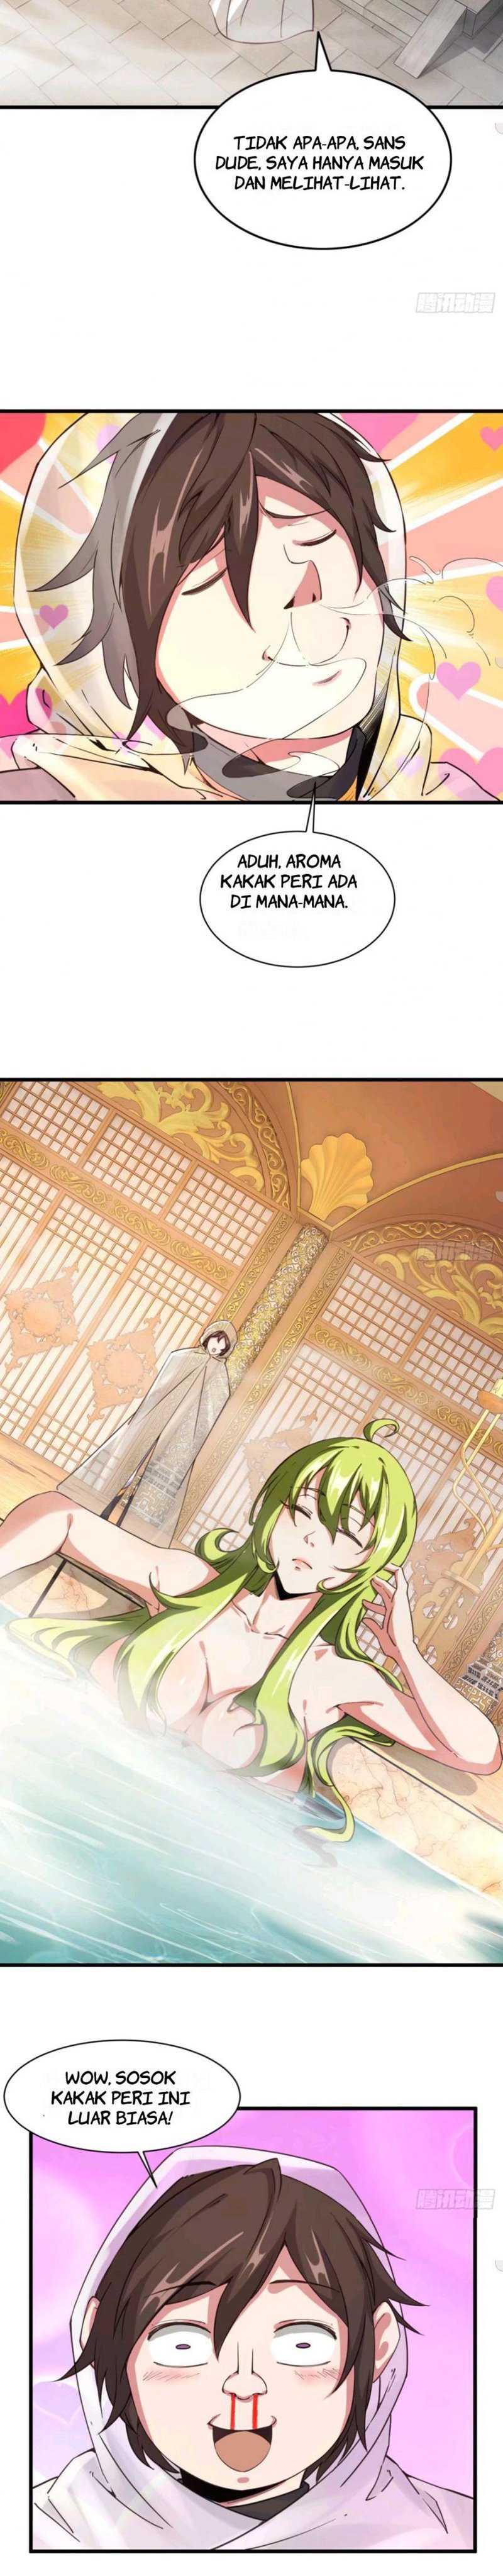 My Harem Depend On Drawing Cards Chapter 104